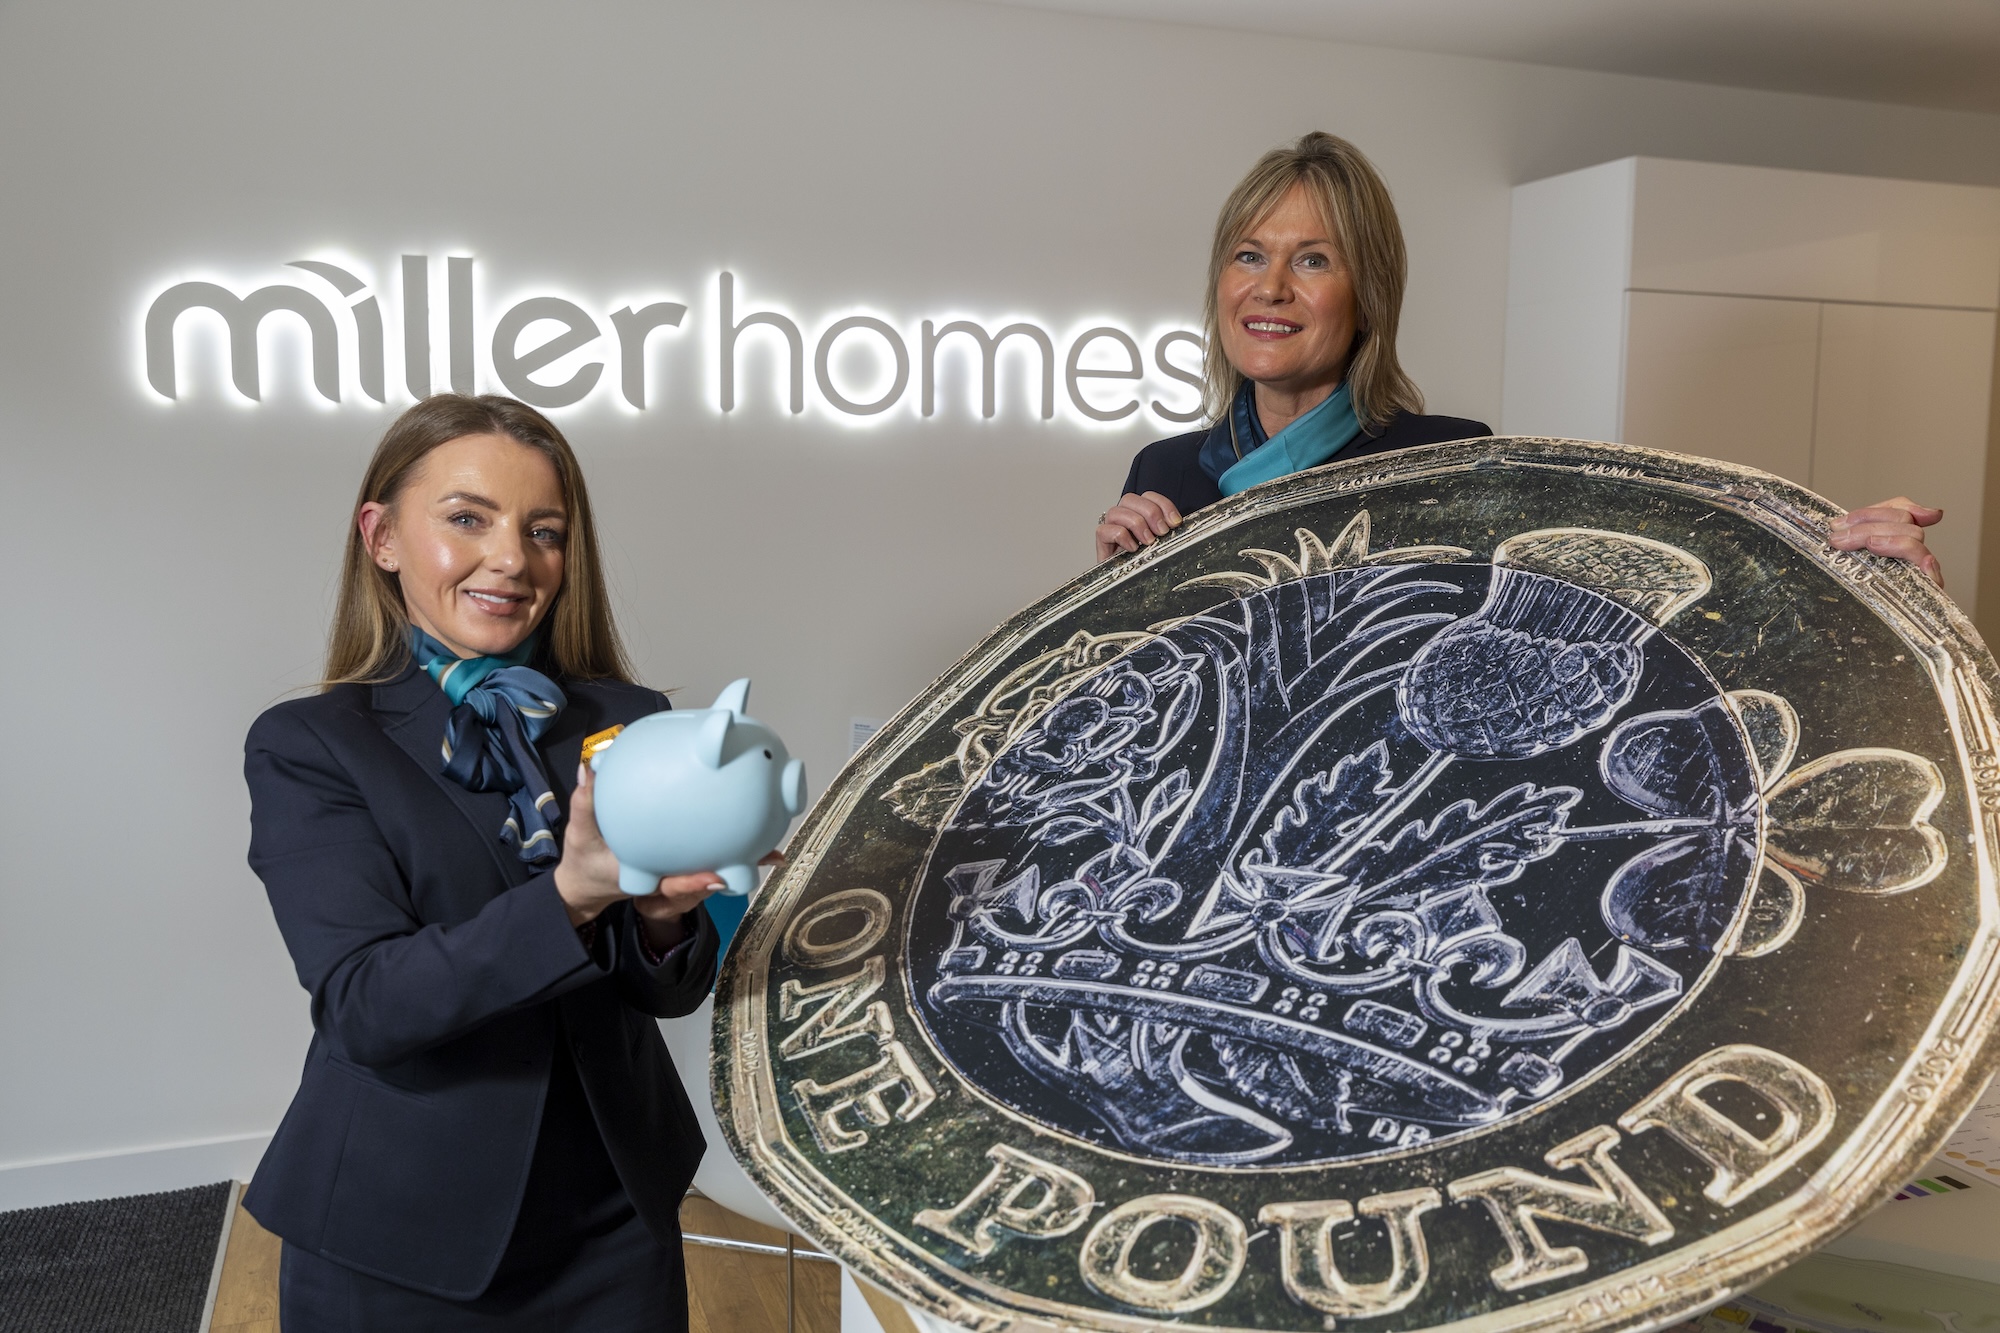 Miller Homes opens next round of community fund initiative